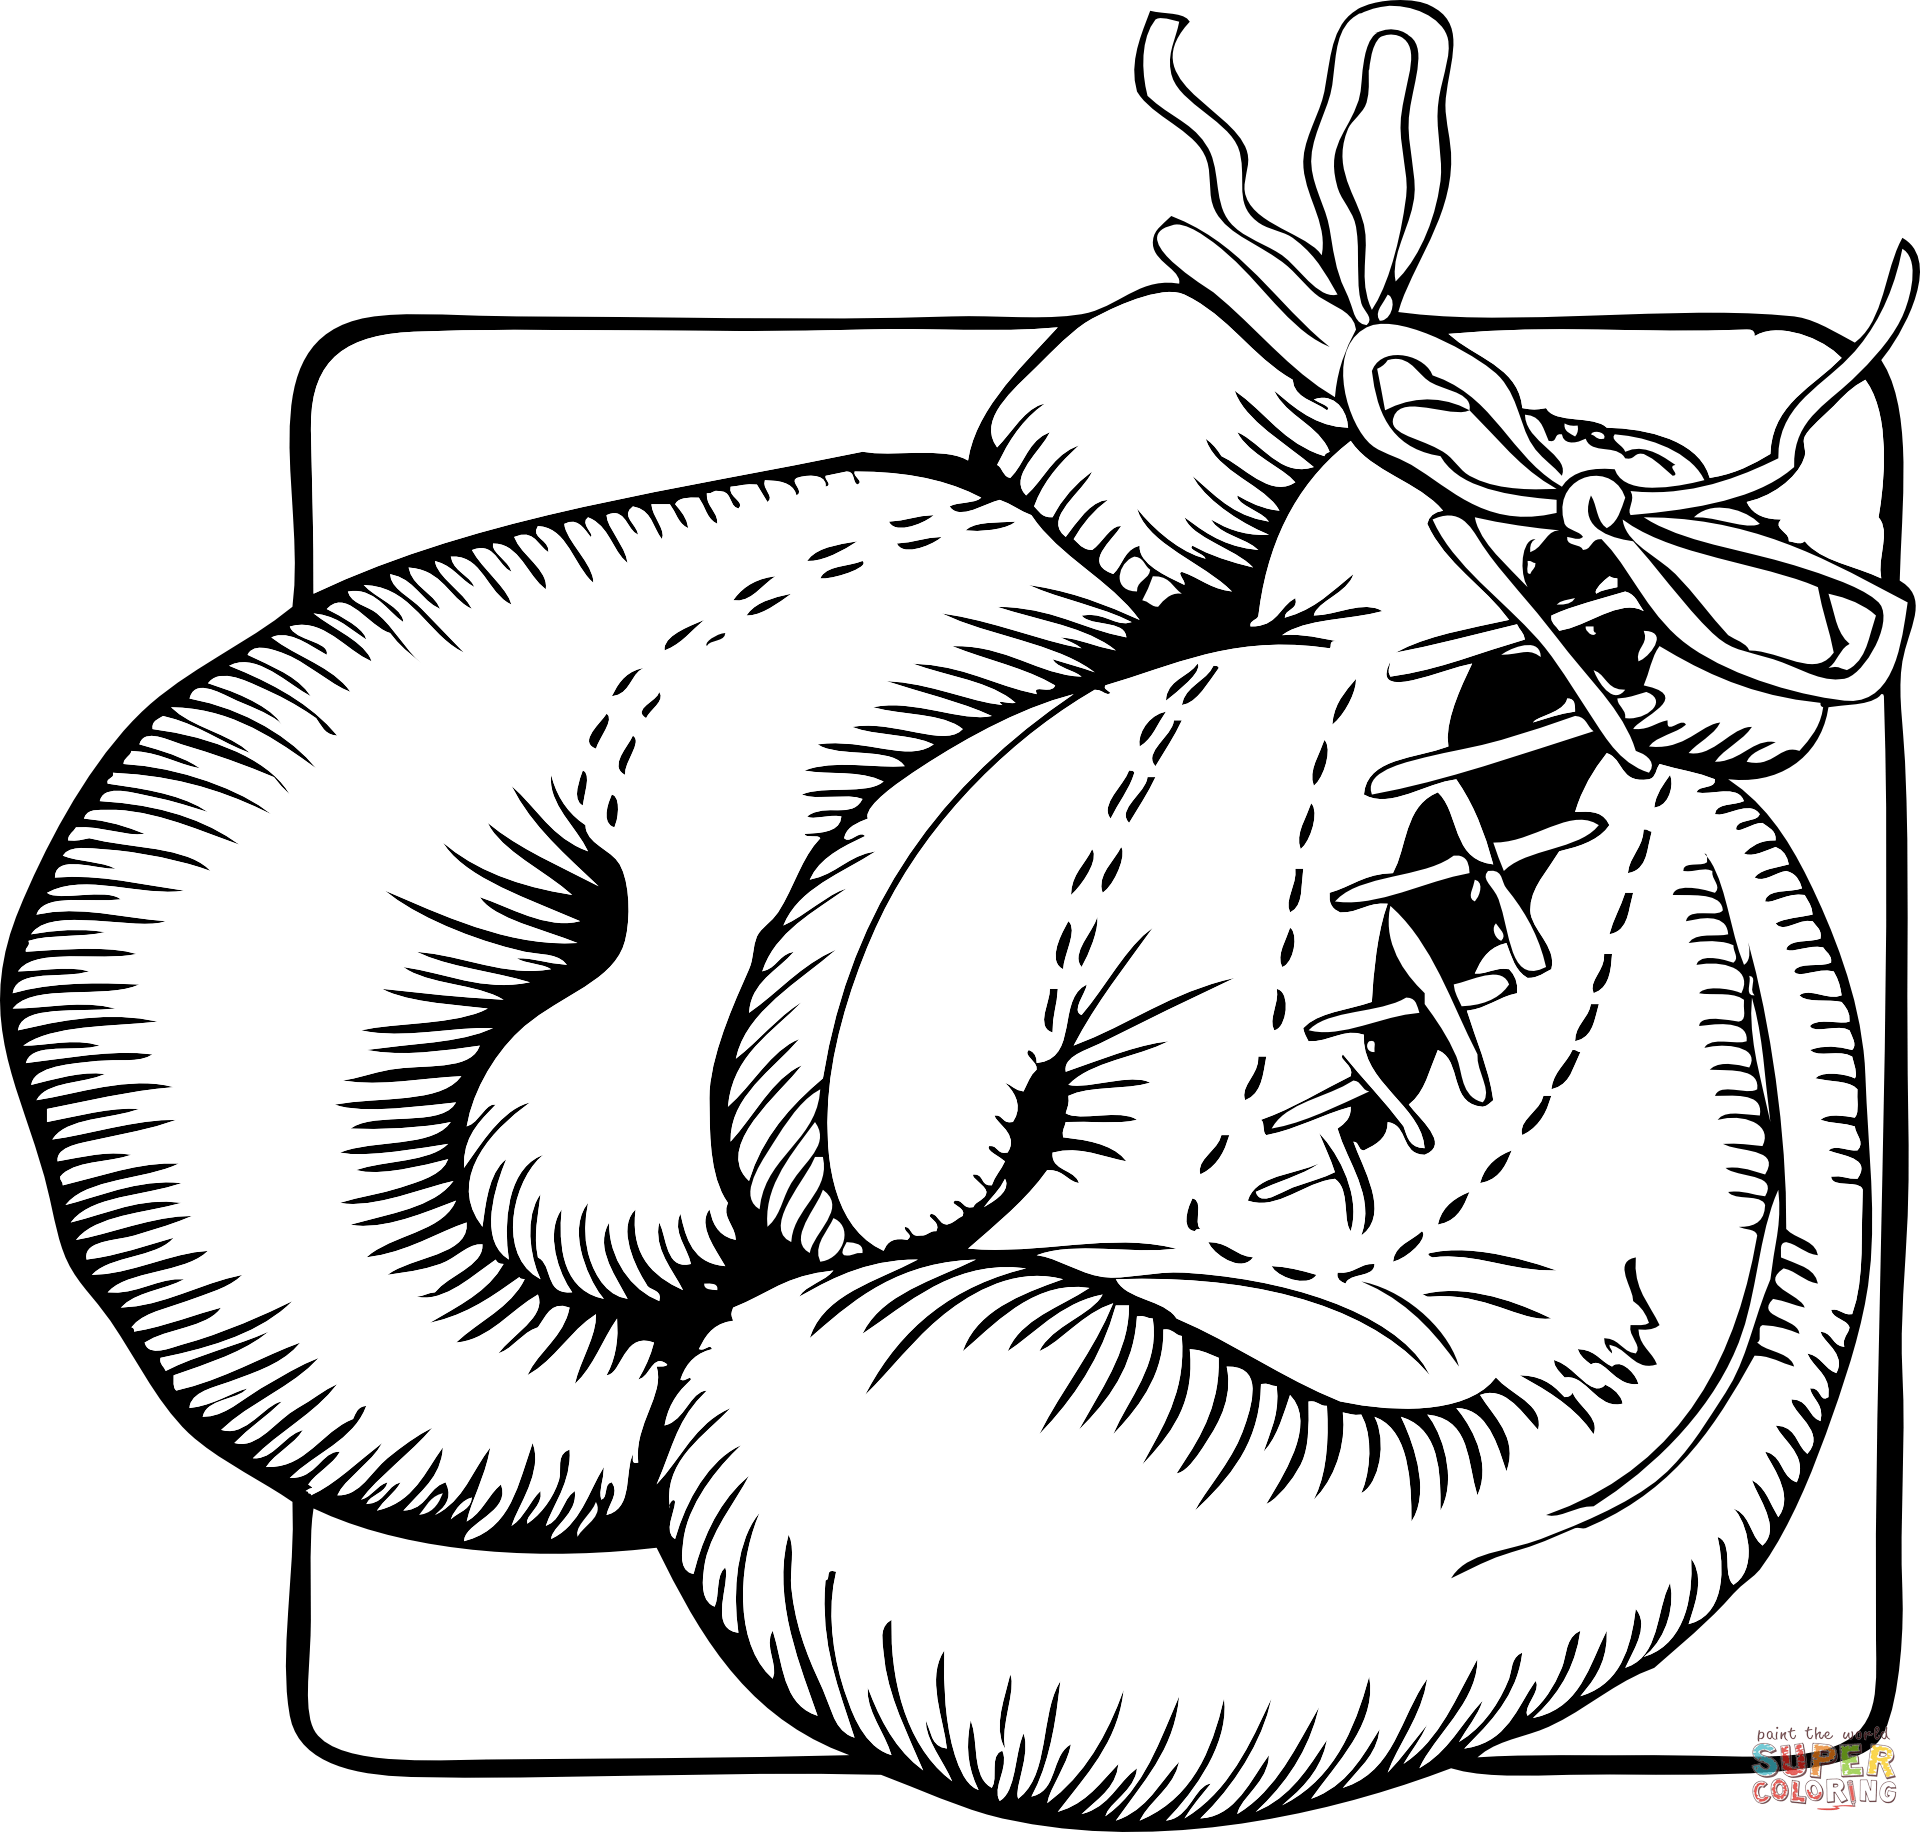 Boxing Gloves coloring page | Free ...